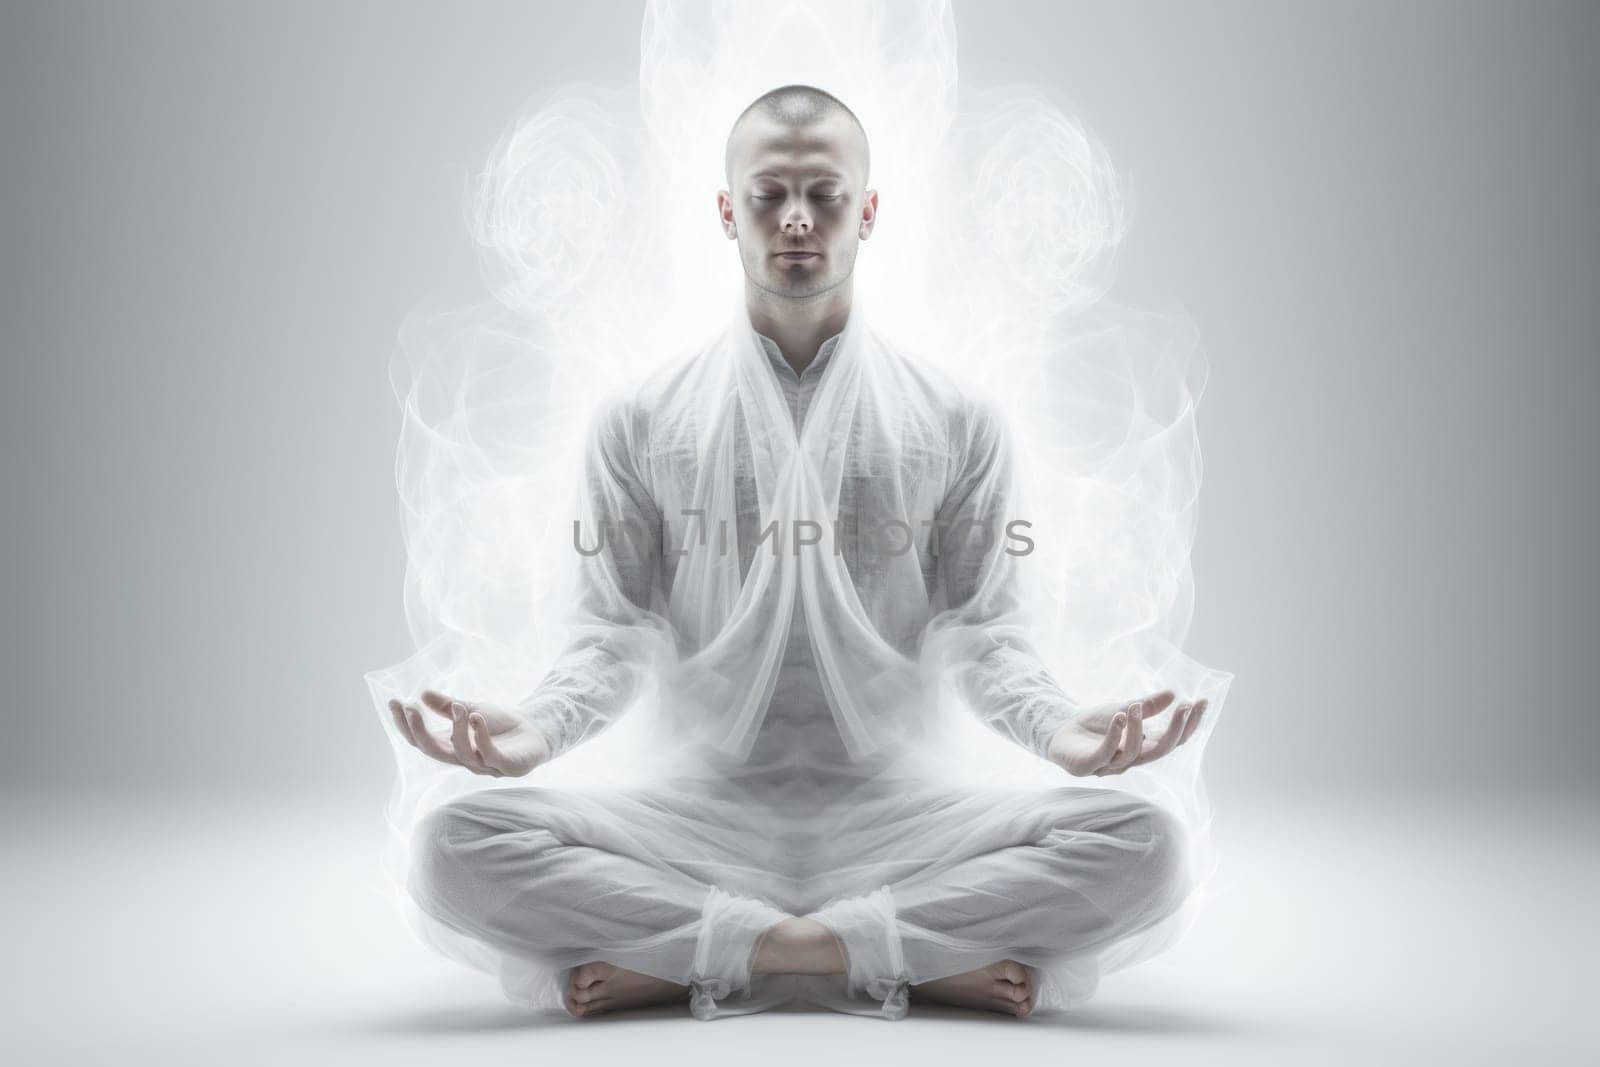 A man in white clothes meditates in an empty, bright room.